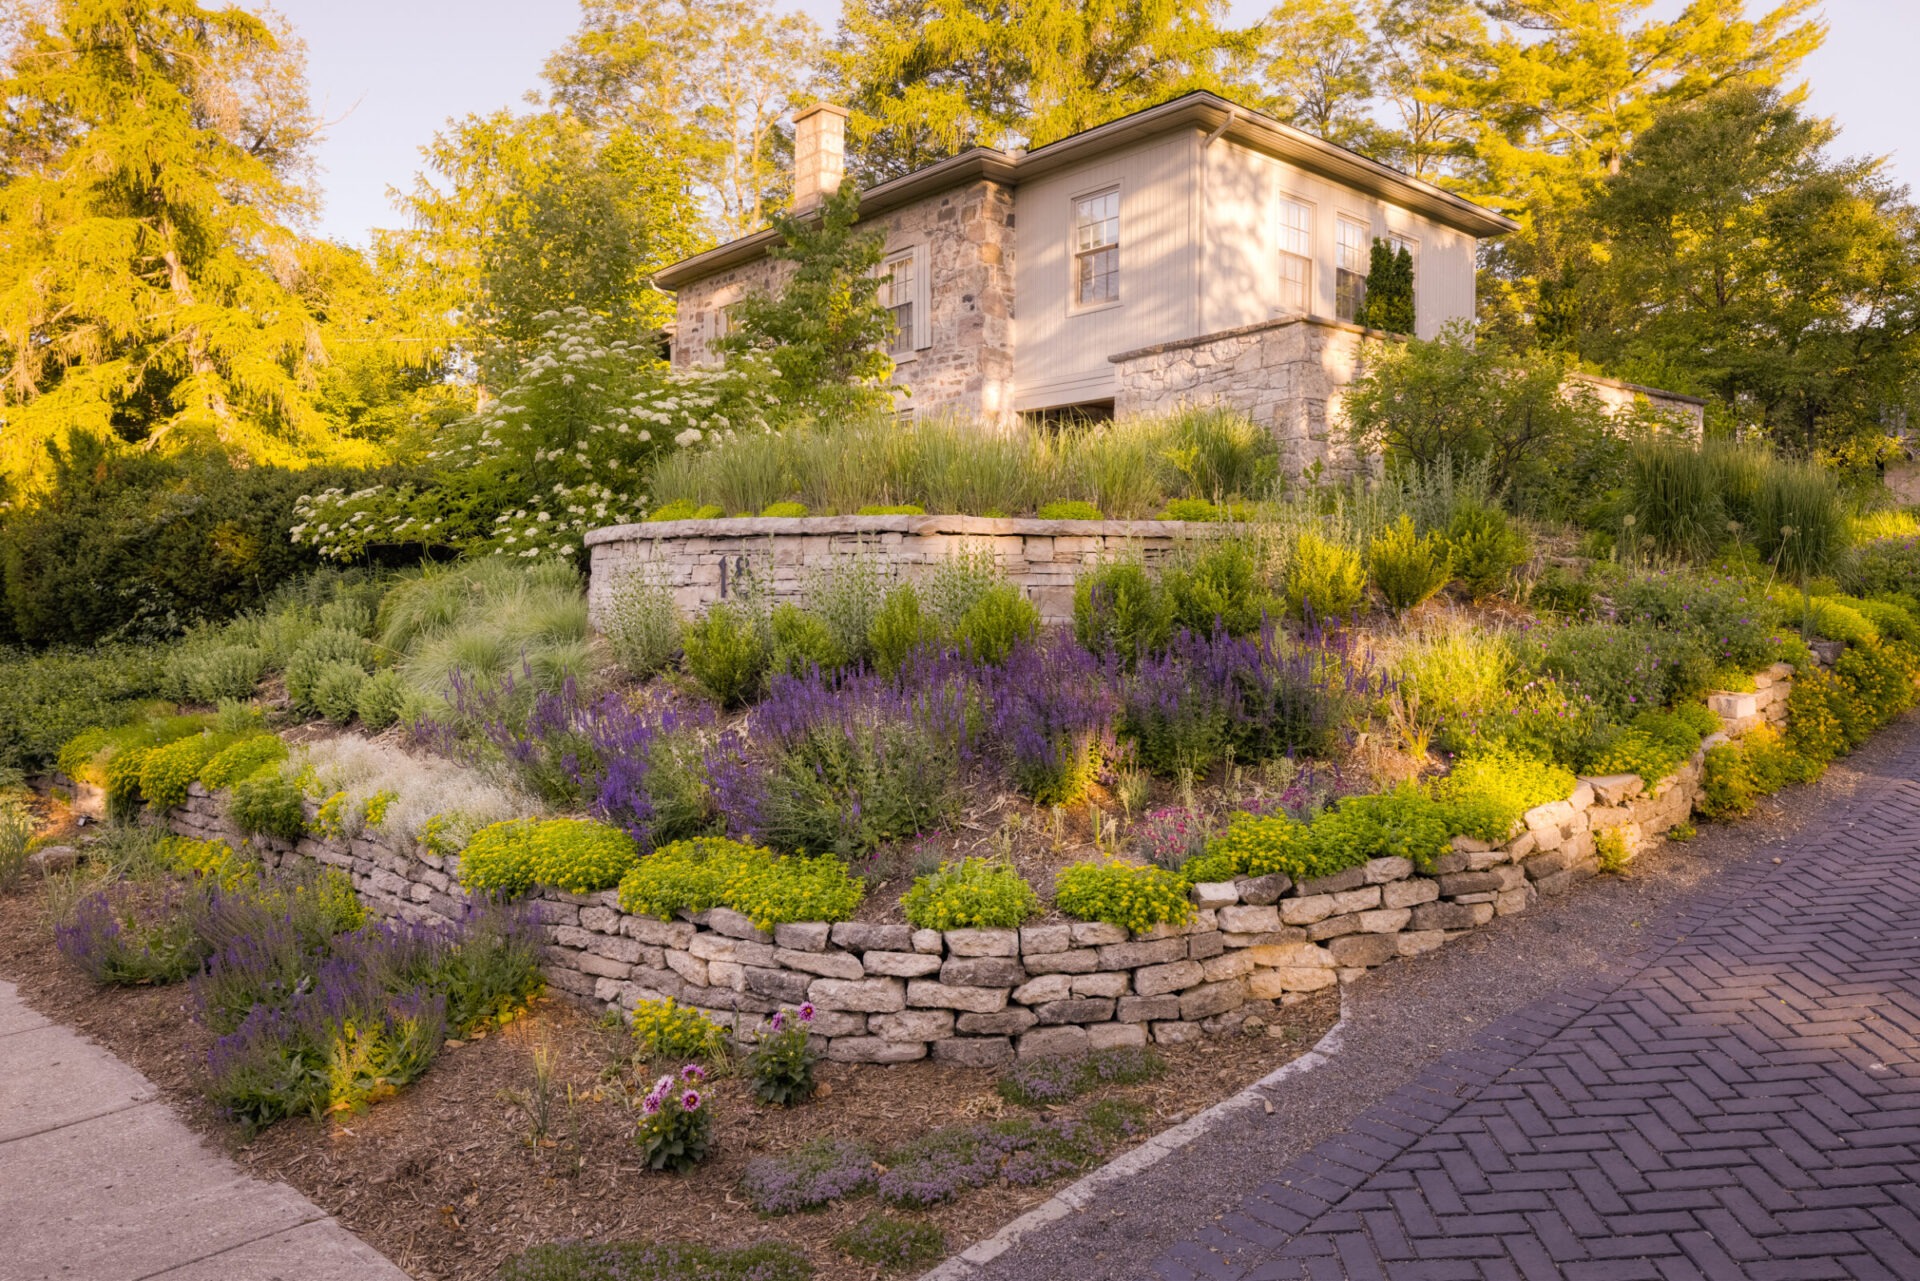 A quaint stone house overlooks a beautifully landscaped garden with lavender, green shrubs, and a cobblestone path during a warm, golden sunset.